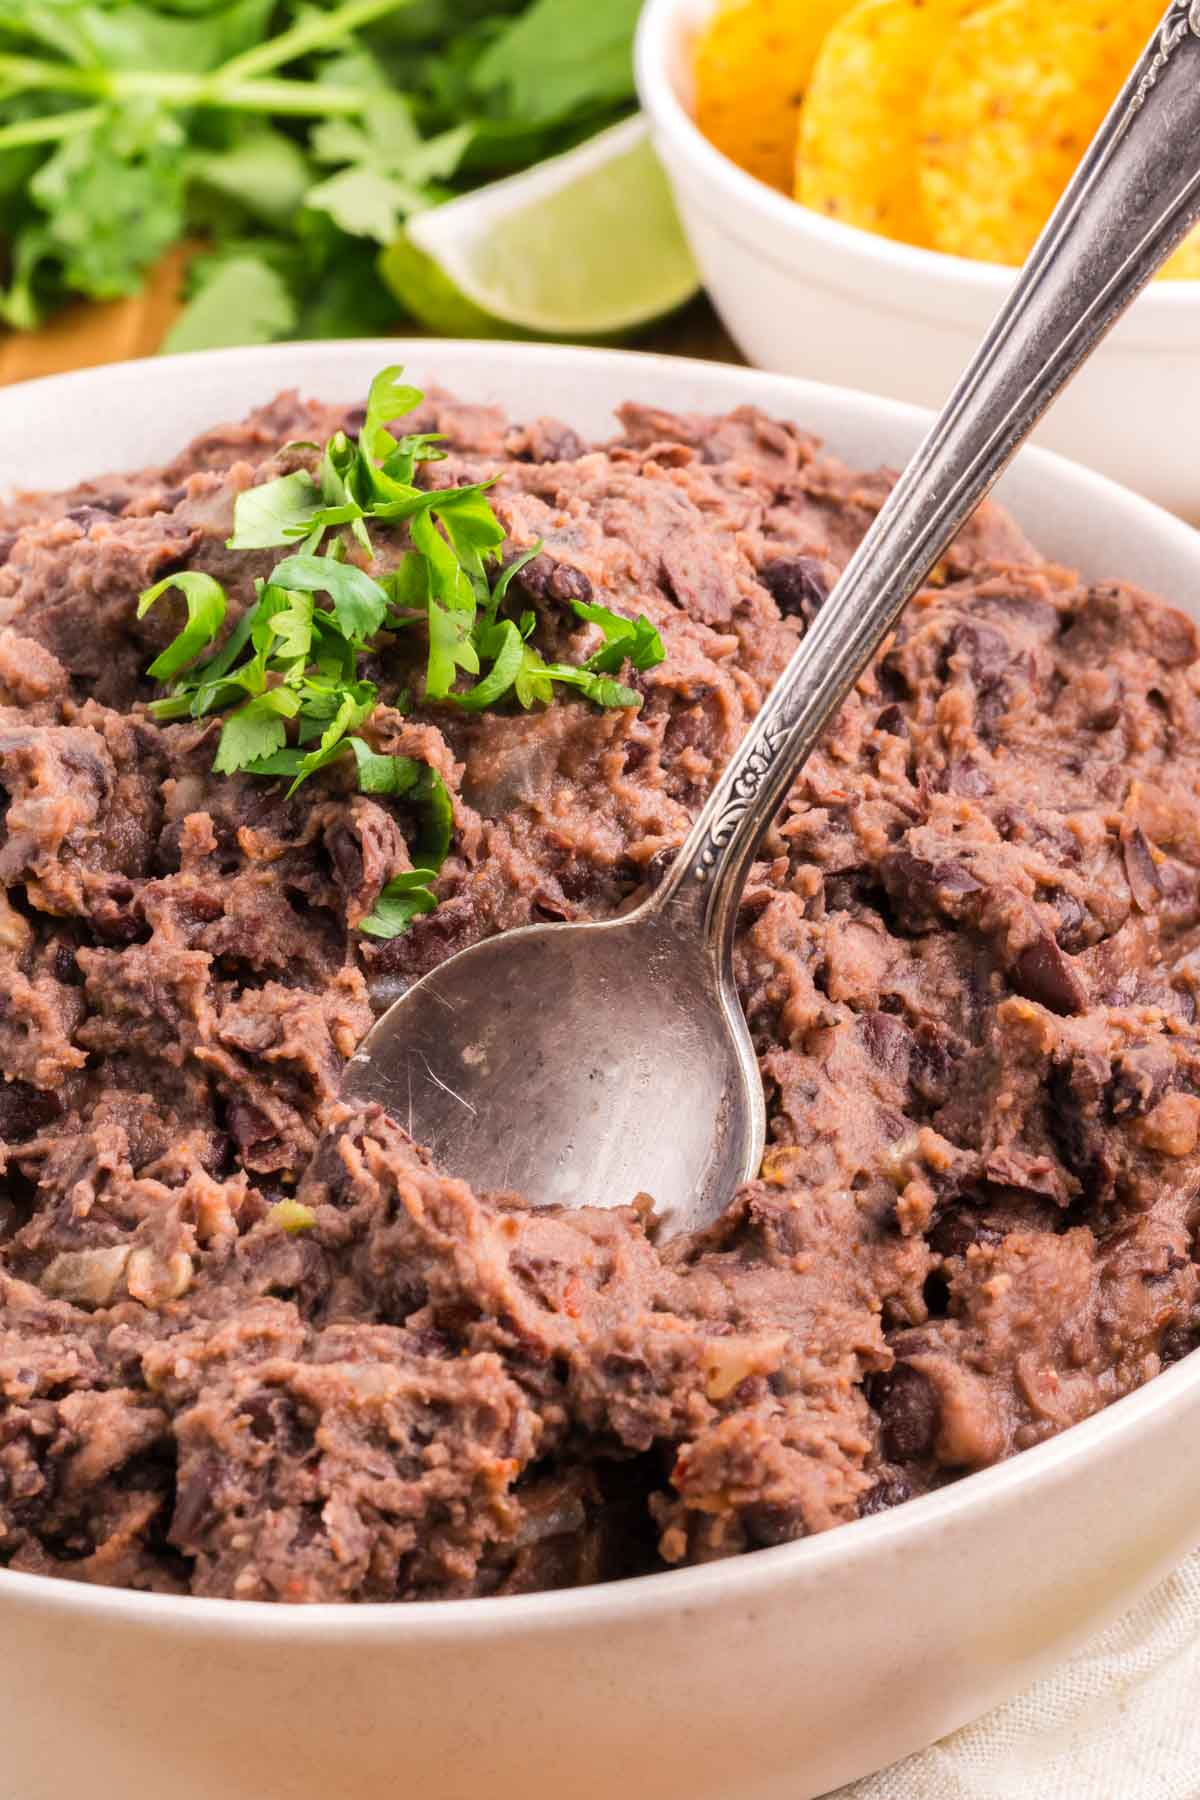 Refried Black Beans in a serving bowl, topped with parsley garnish and a spoon ready to serve.